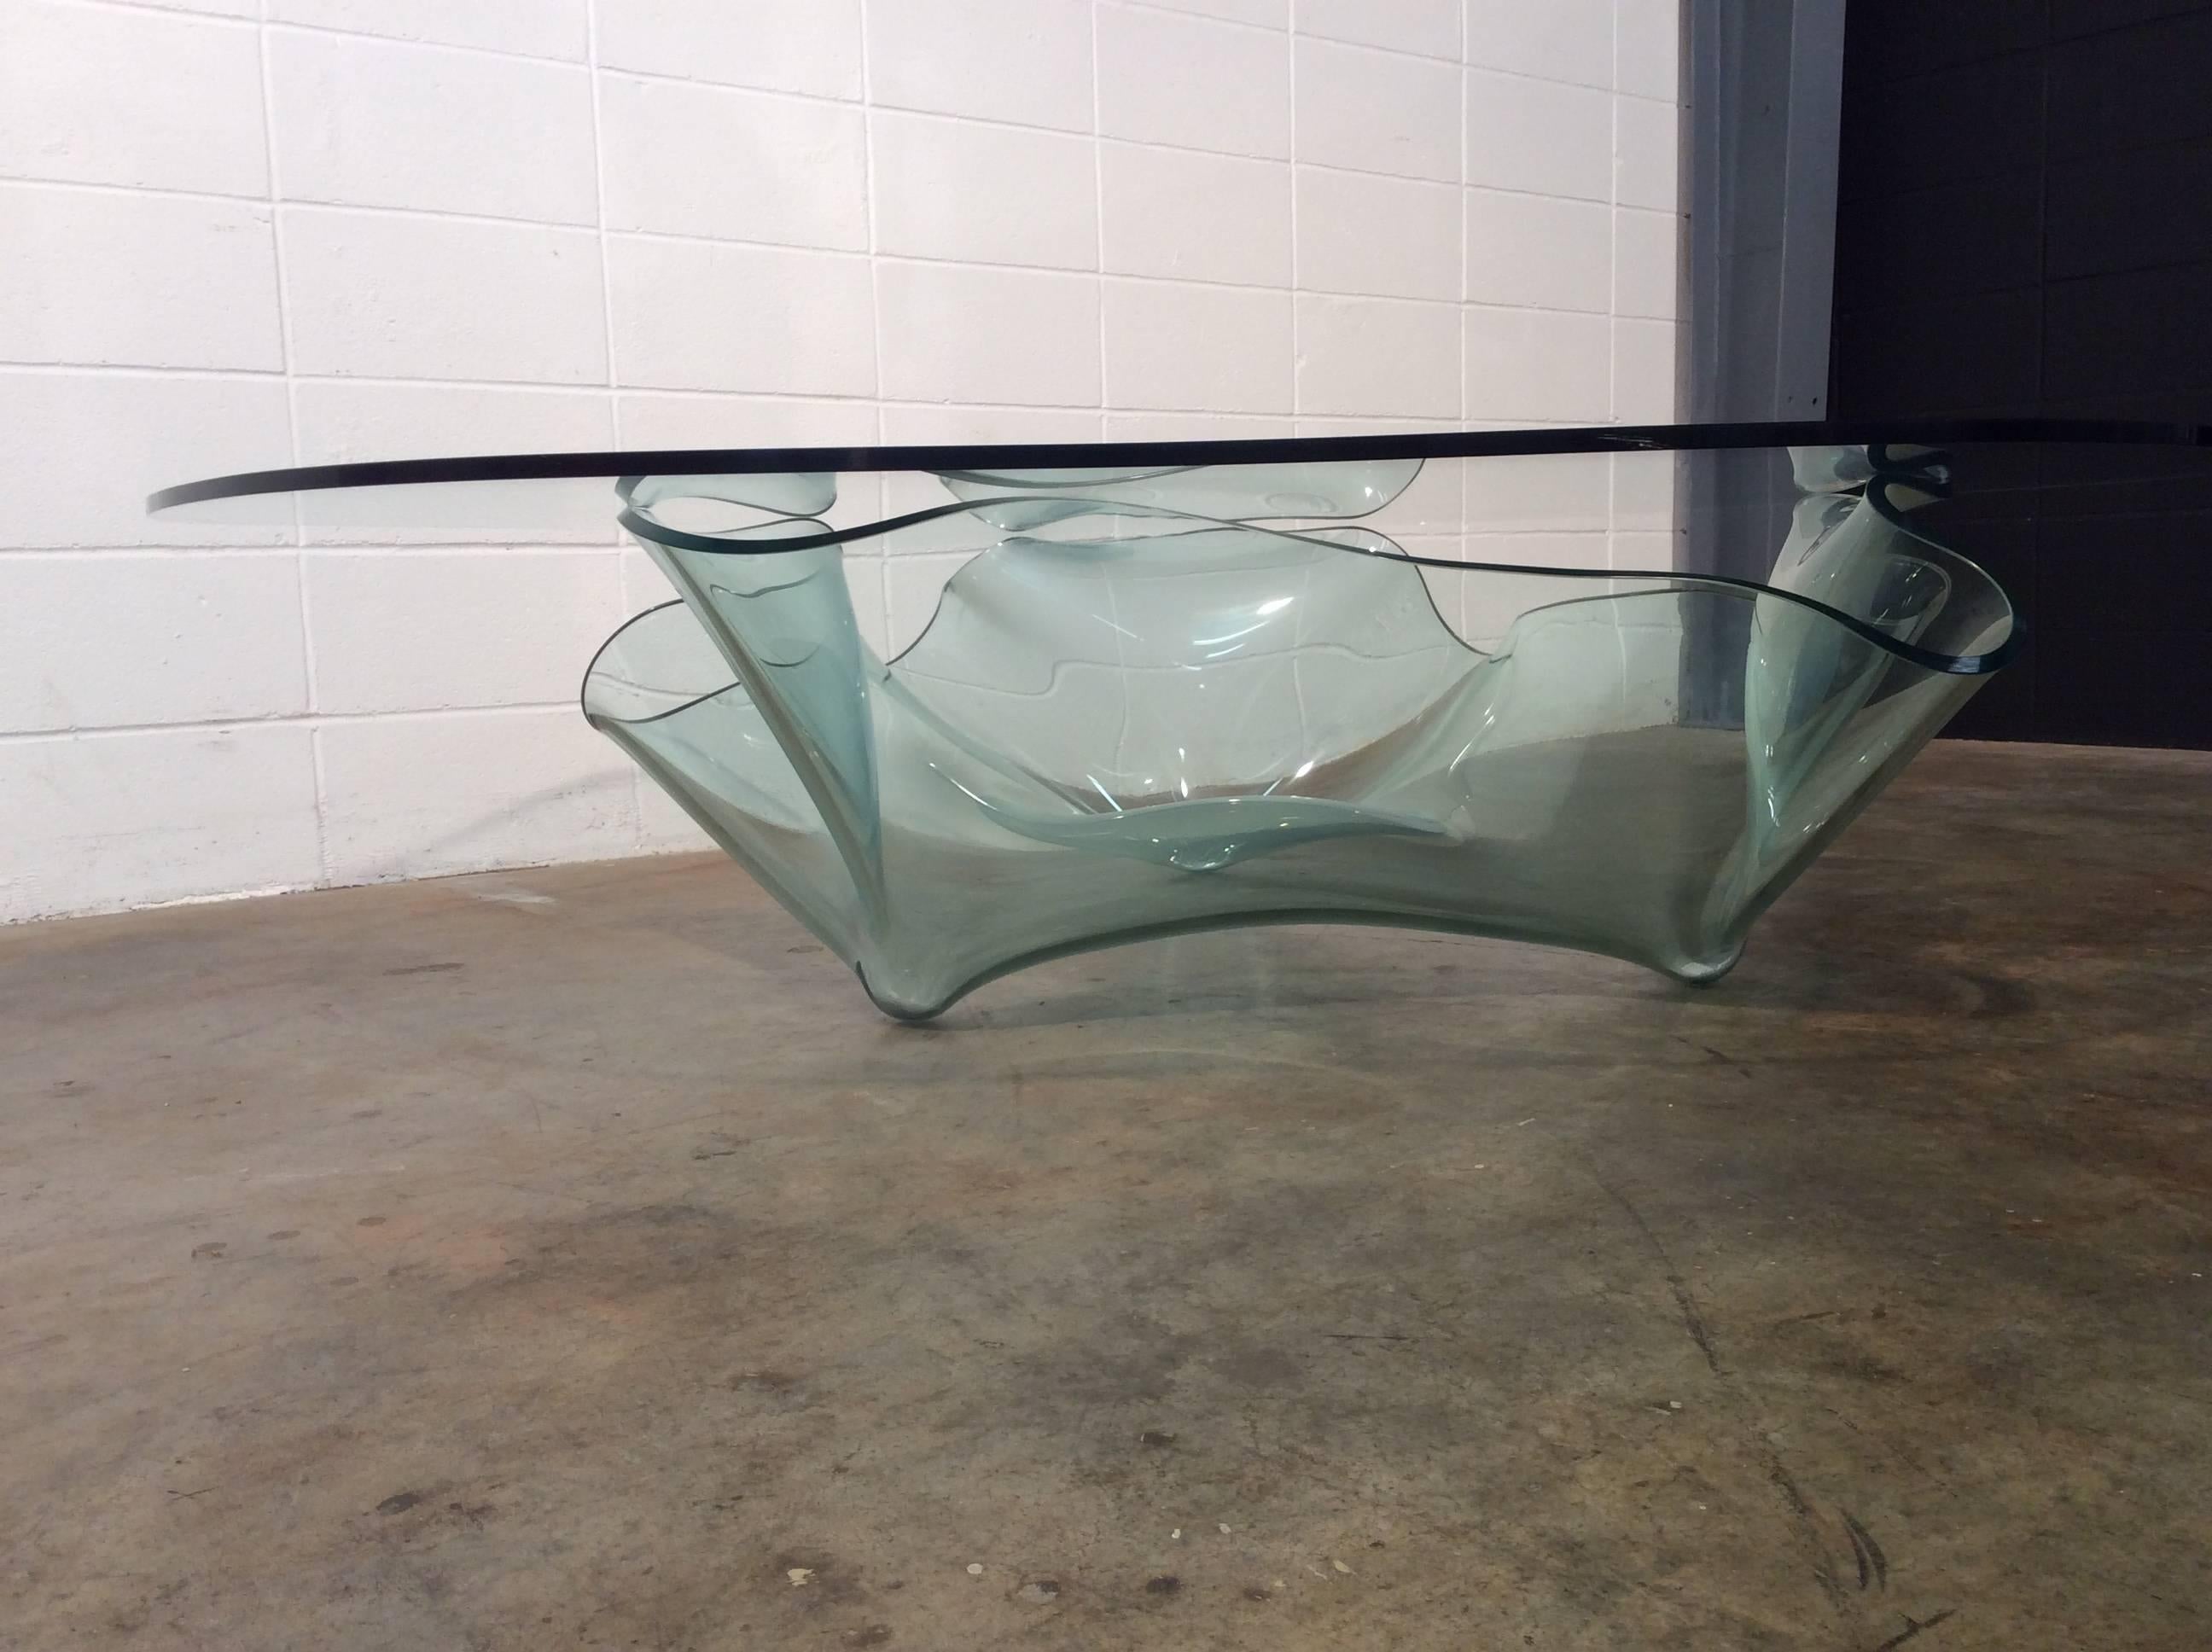 Late 20th Century Monumental Glass Coffee Table by the Late Laurel Fyfe, Stunning Designer Item